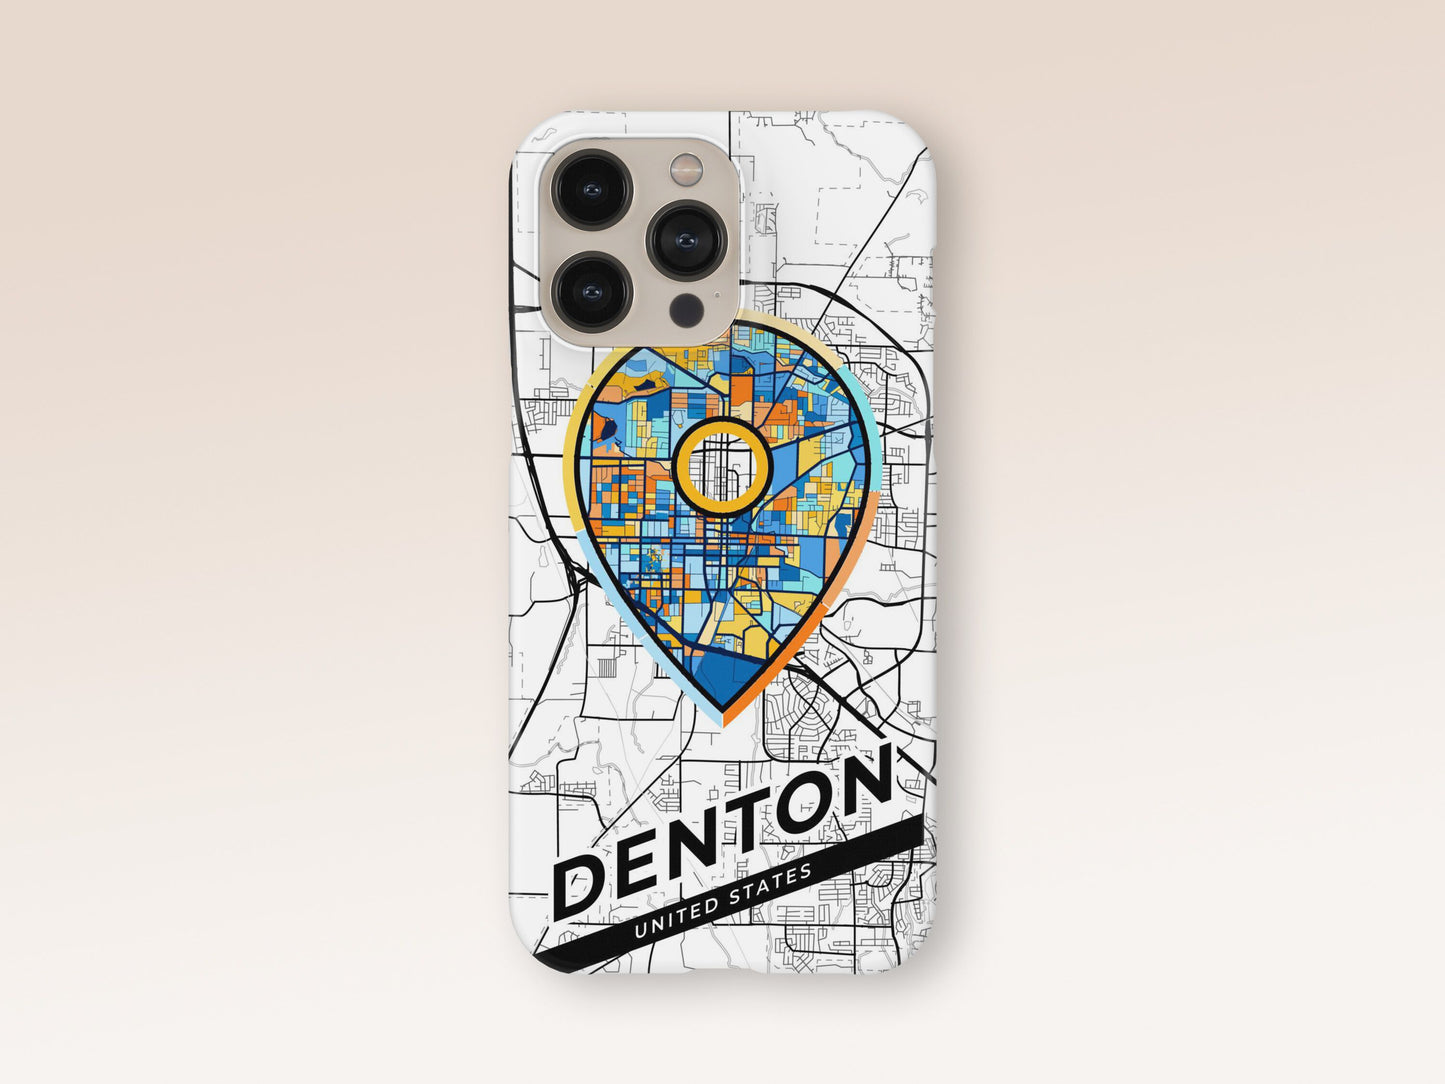 Denton Texas slim phone case with colorful icon. Birthday, wedding or housewarming gift. Couple match cases. 1